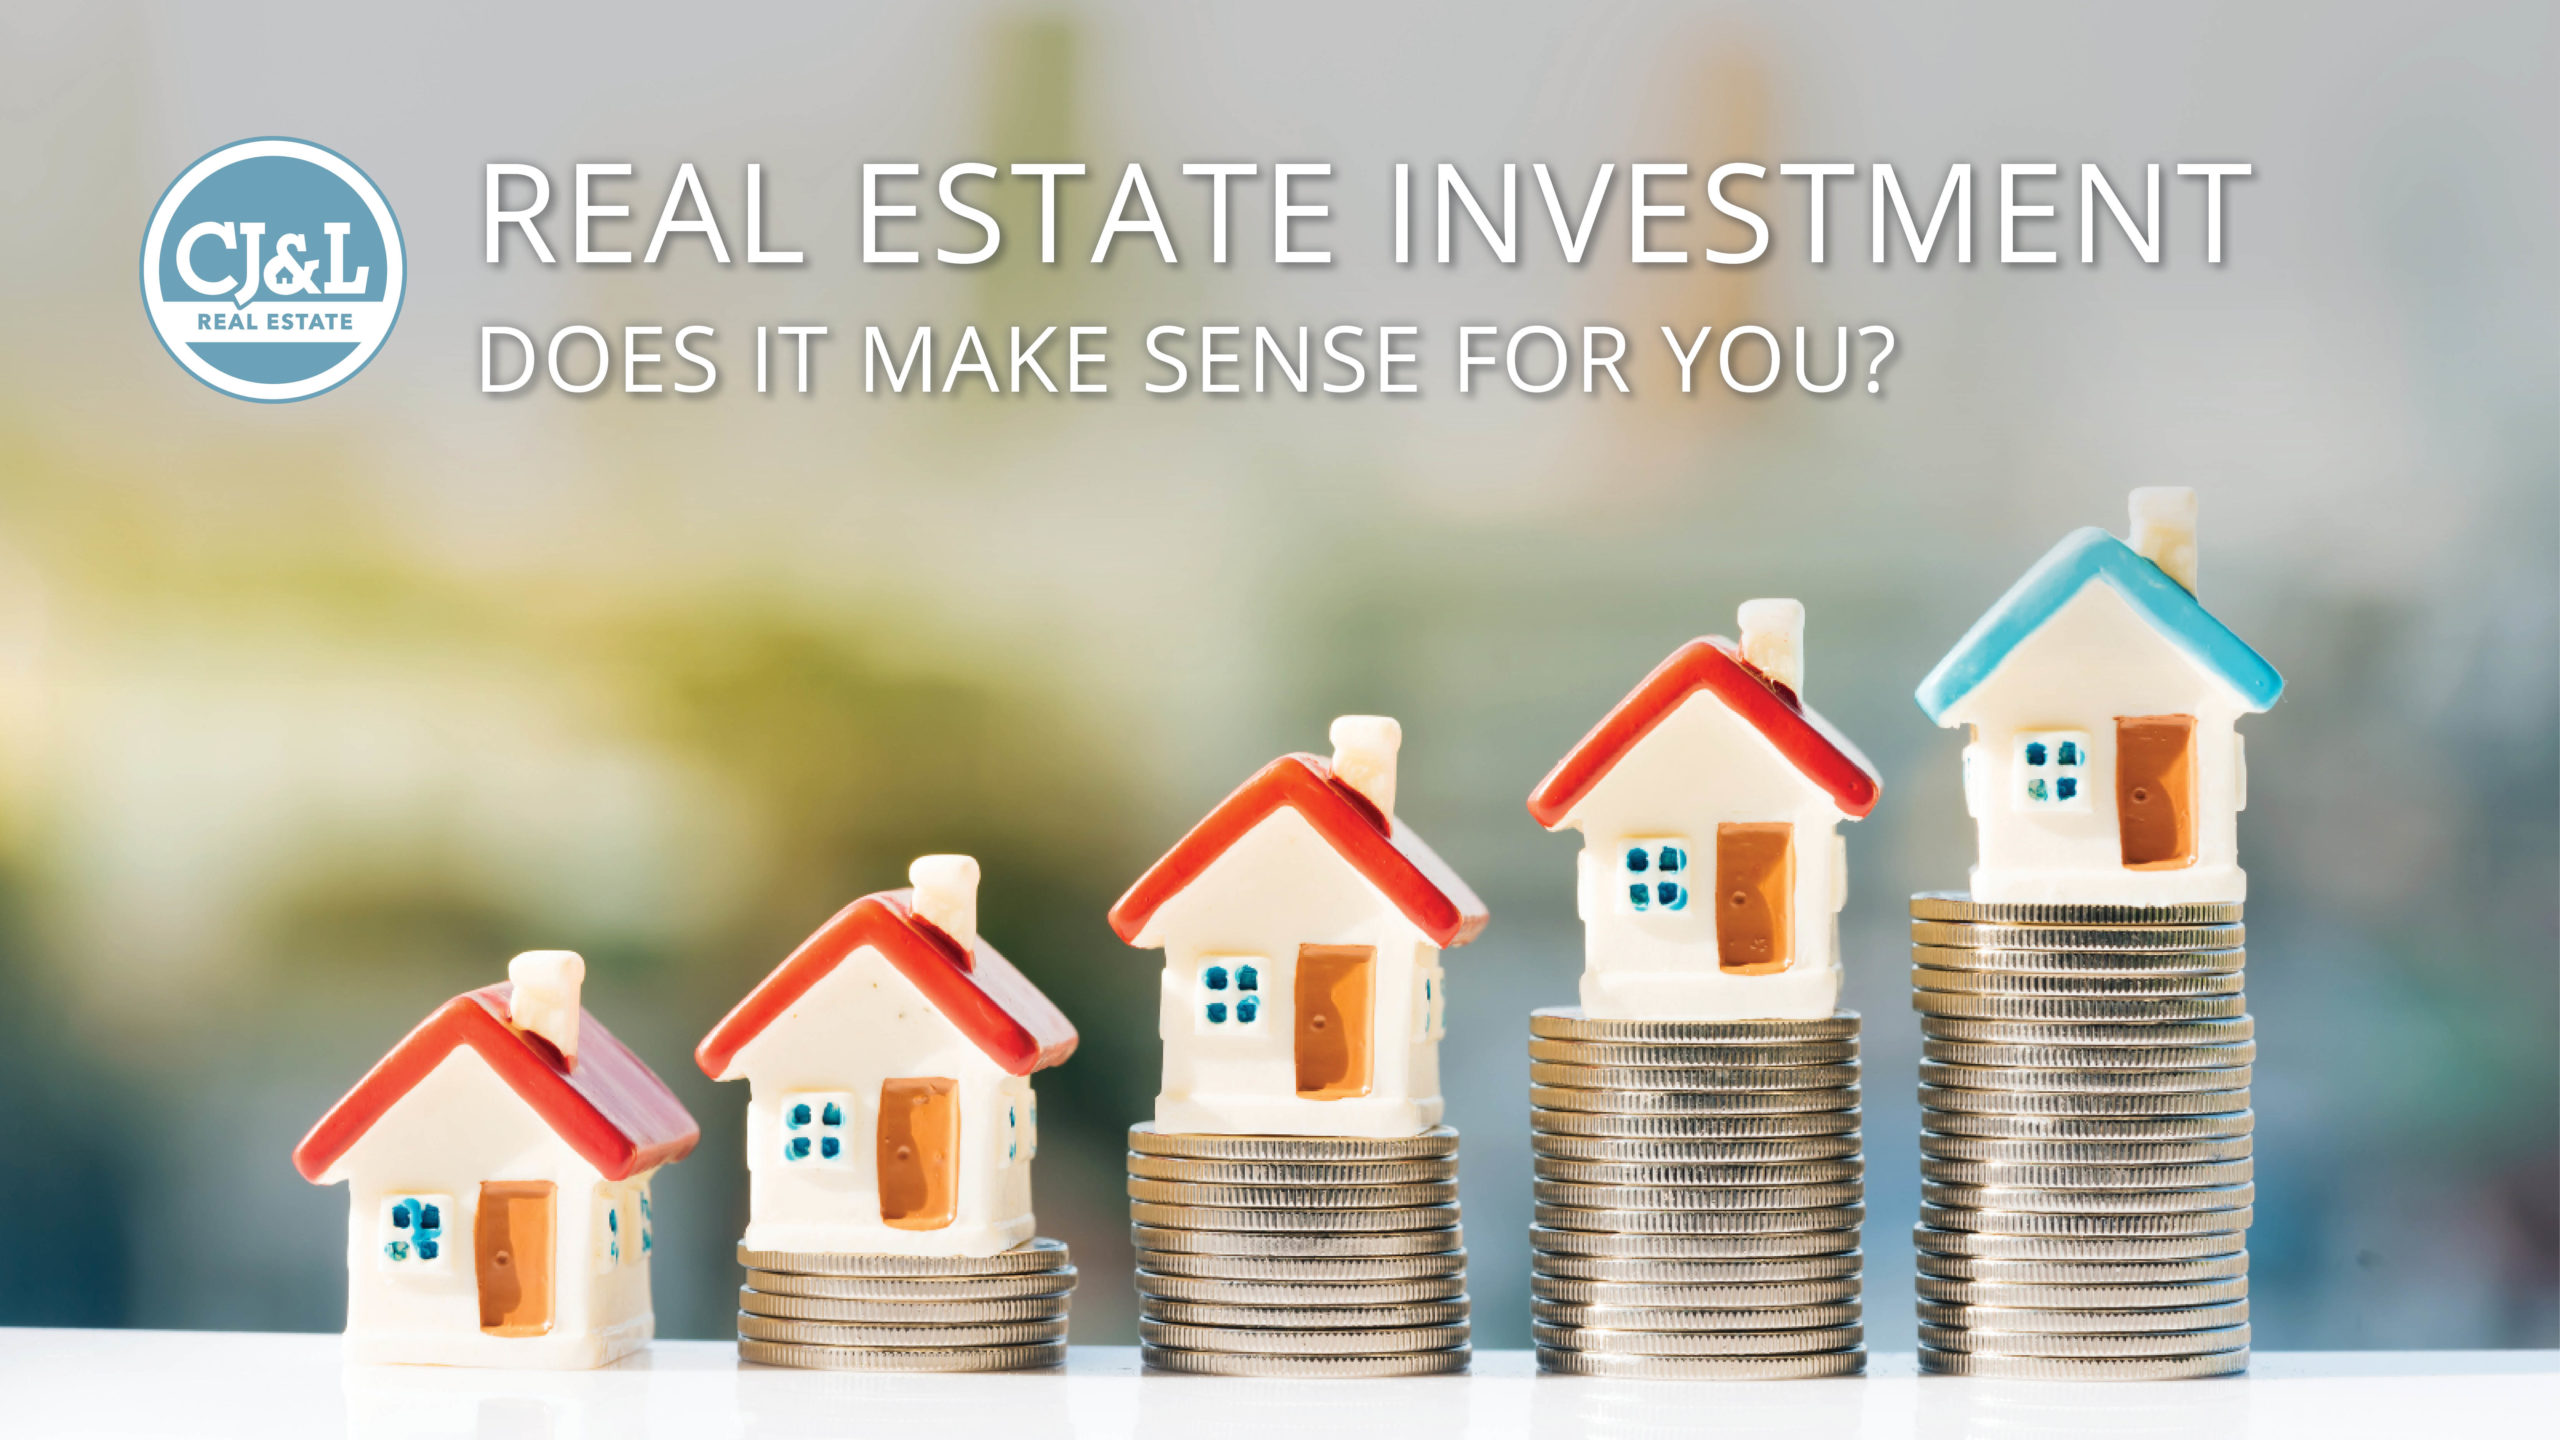 Real Estate Investment: Does it make sense for you?